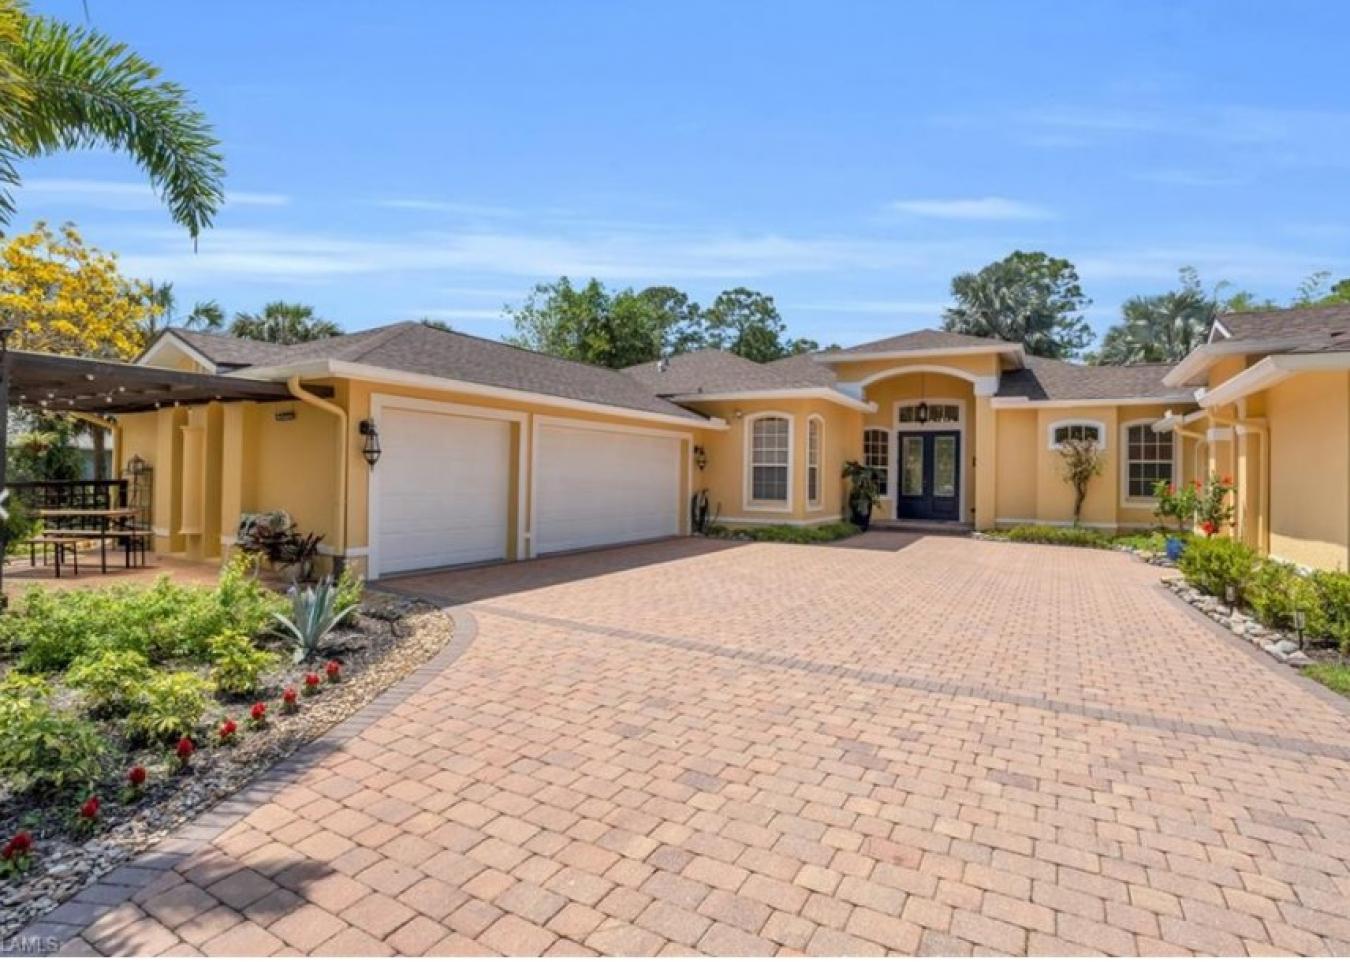 481 31st street SW, Naples, Florida, 34117, United States, 5 Bedrooms Bedrooms, ,3 BathroomsBathrooms,Residential,For Sale,481 31st street SW,1493831